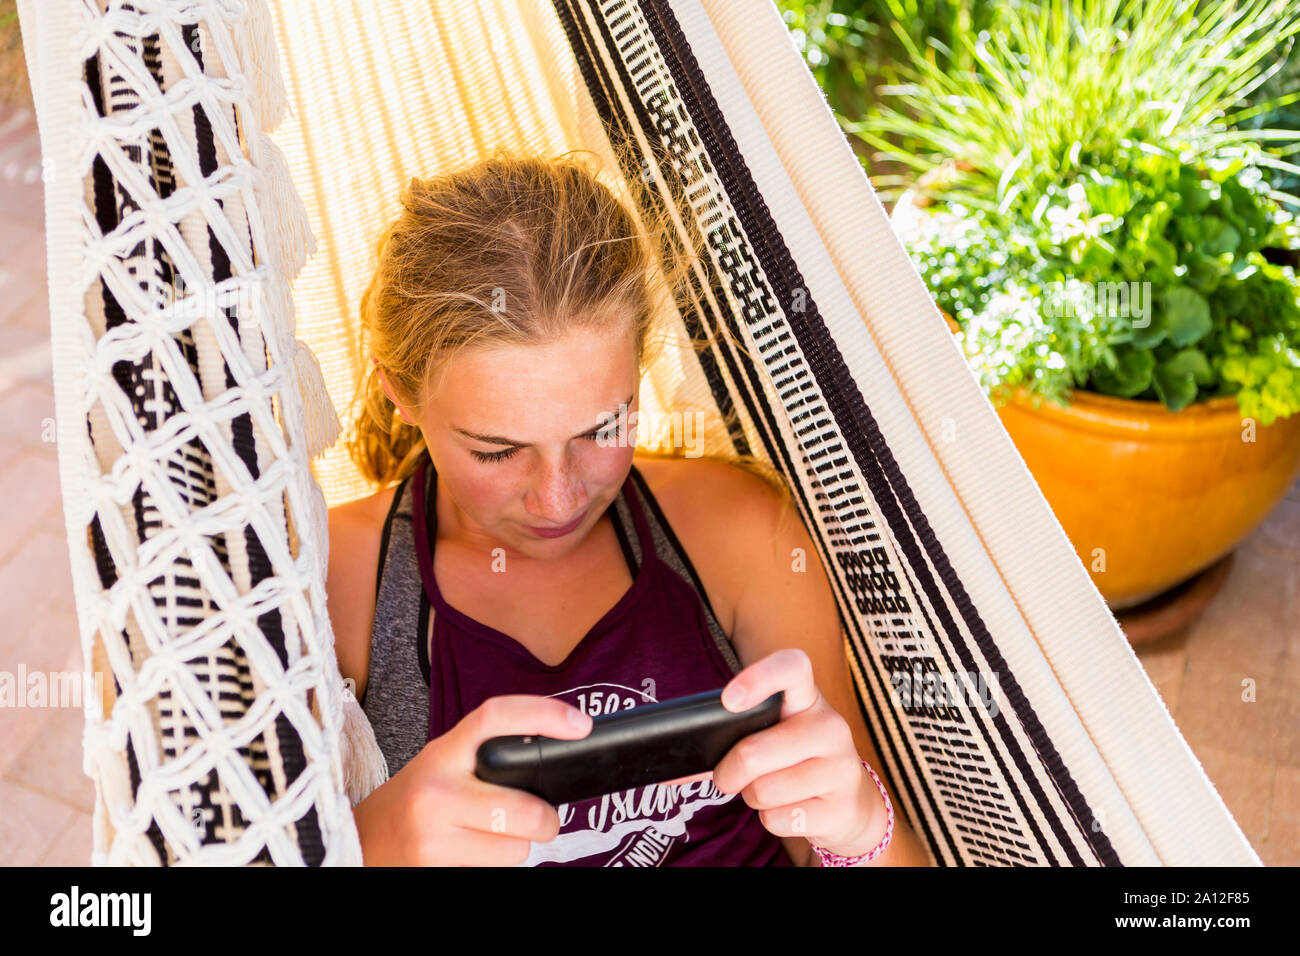 13 year old girl in hammock looking at smart phone Stock Photo